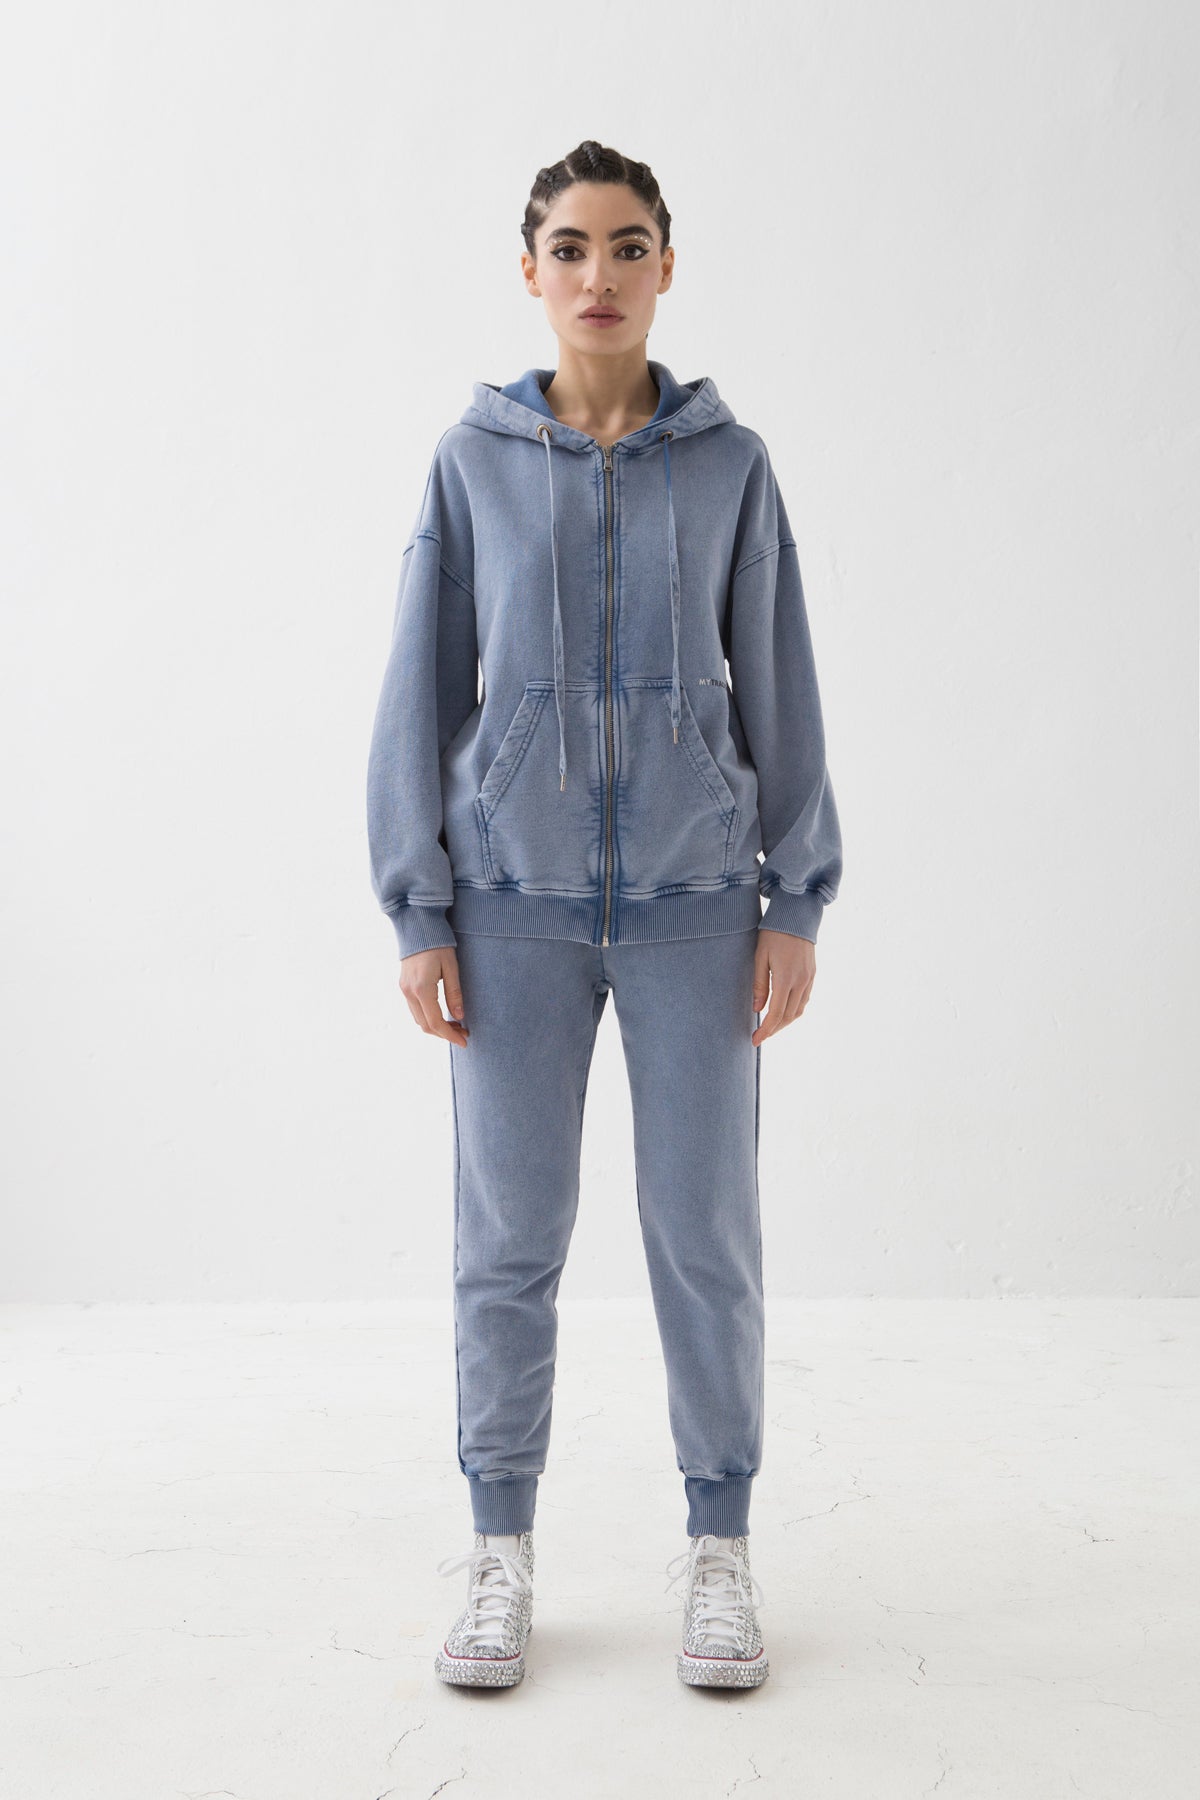 MYTRACKSUIT - HOODIE + ZIP SWEATER / RIBBED BAND PANTS BLUE